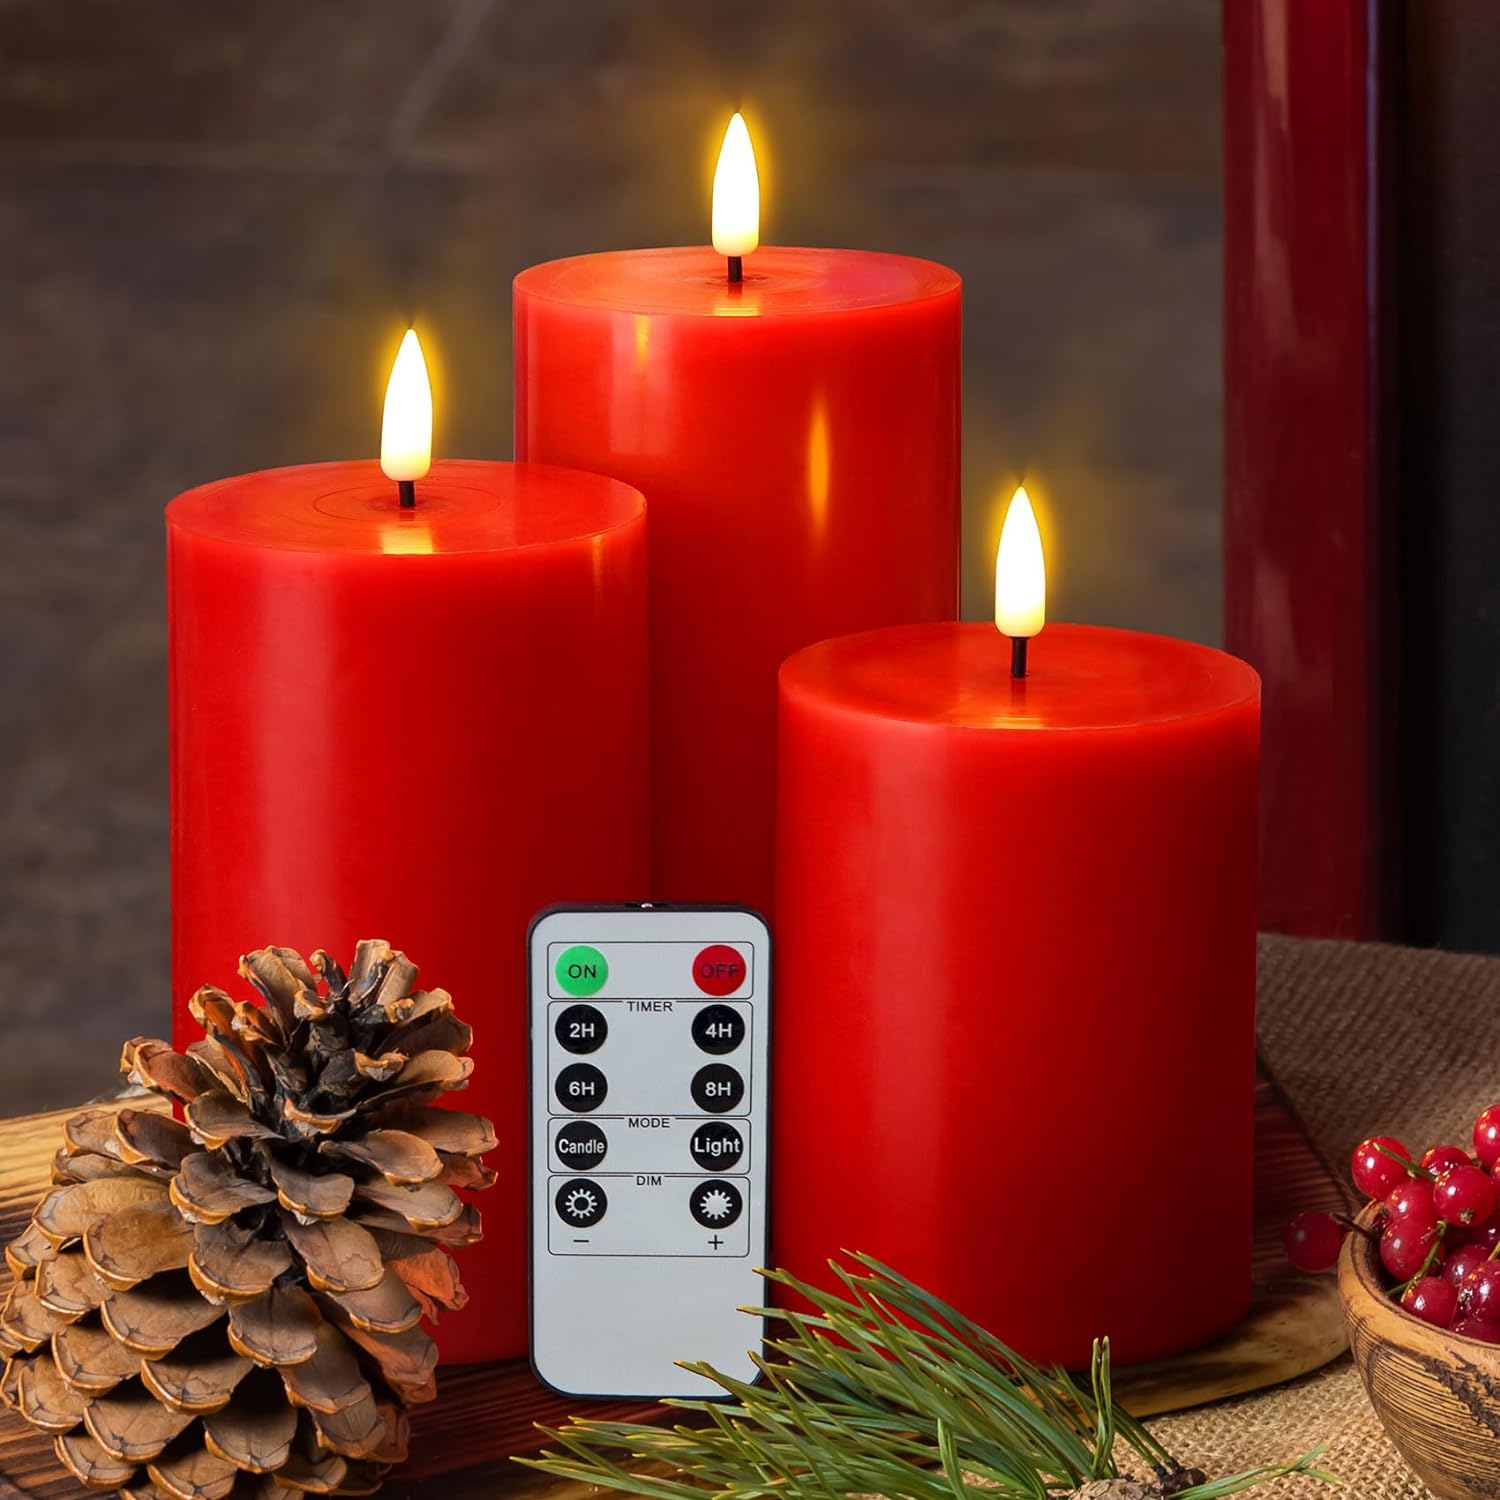 Eywamage Red Flickering Flameless Pillar Candles with Remote, Real Wax Battery Operated Christmas LED Candles Set of 3